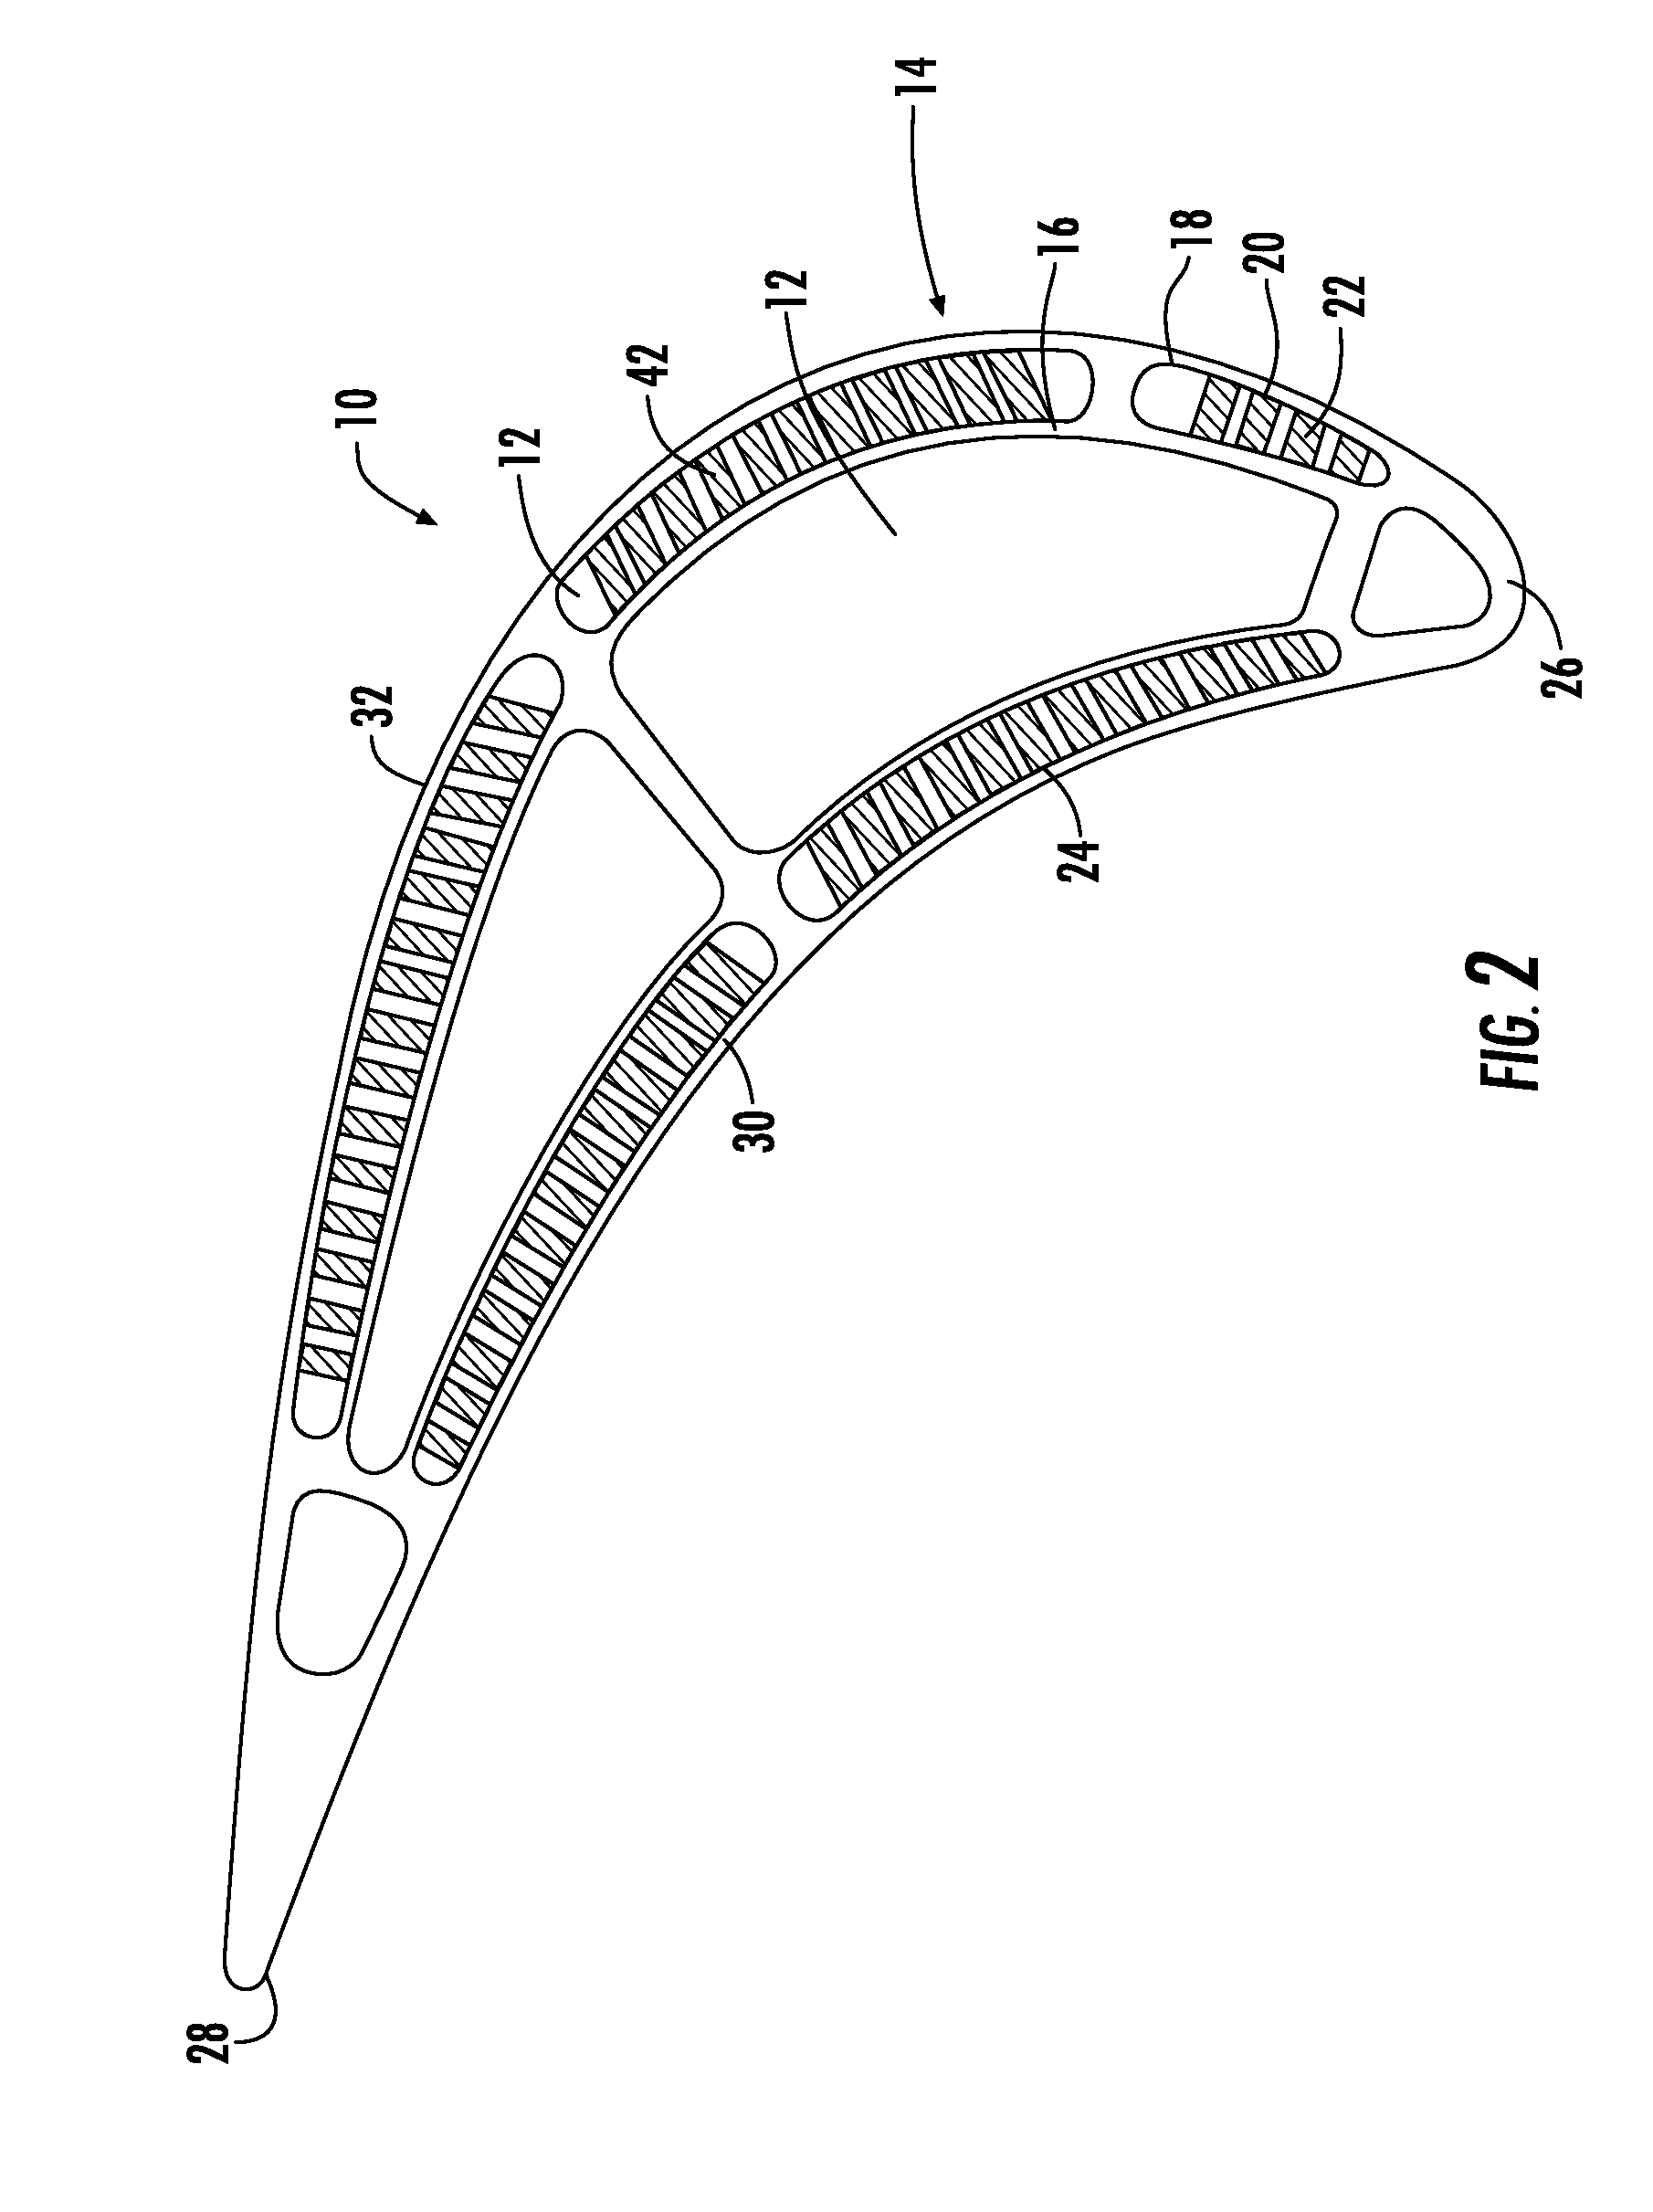 Turbine Airfoil With Dual Wall Formed from Inner and Outer Layers Separated by a Compliant Structure